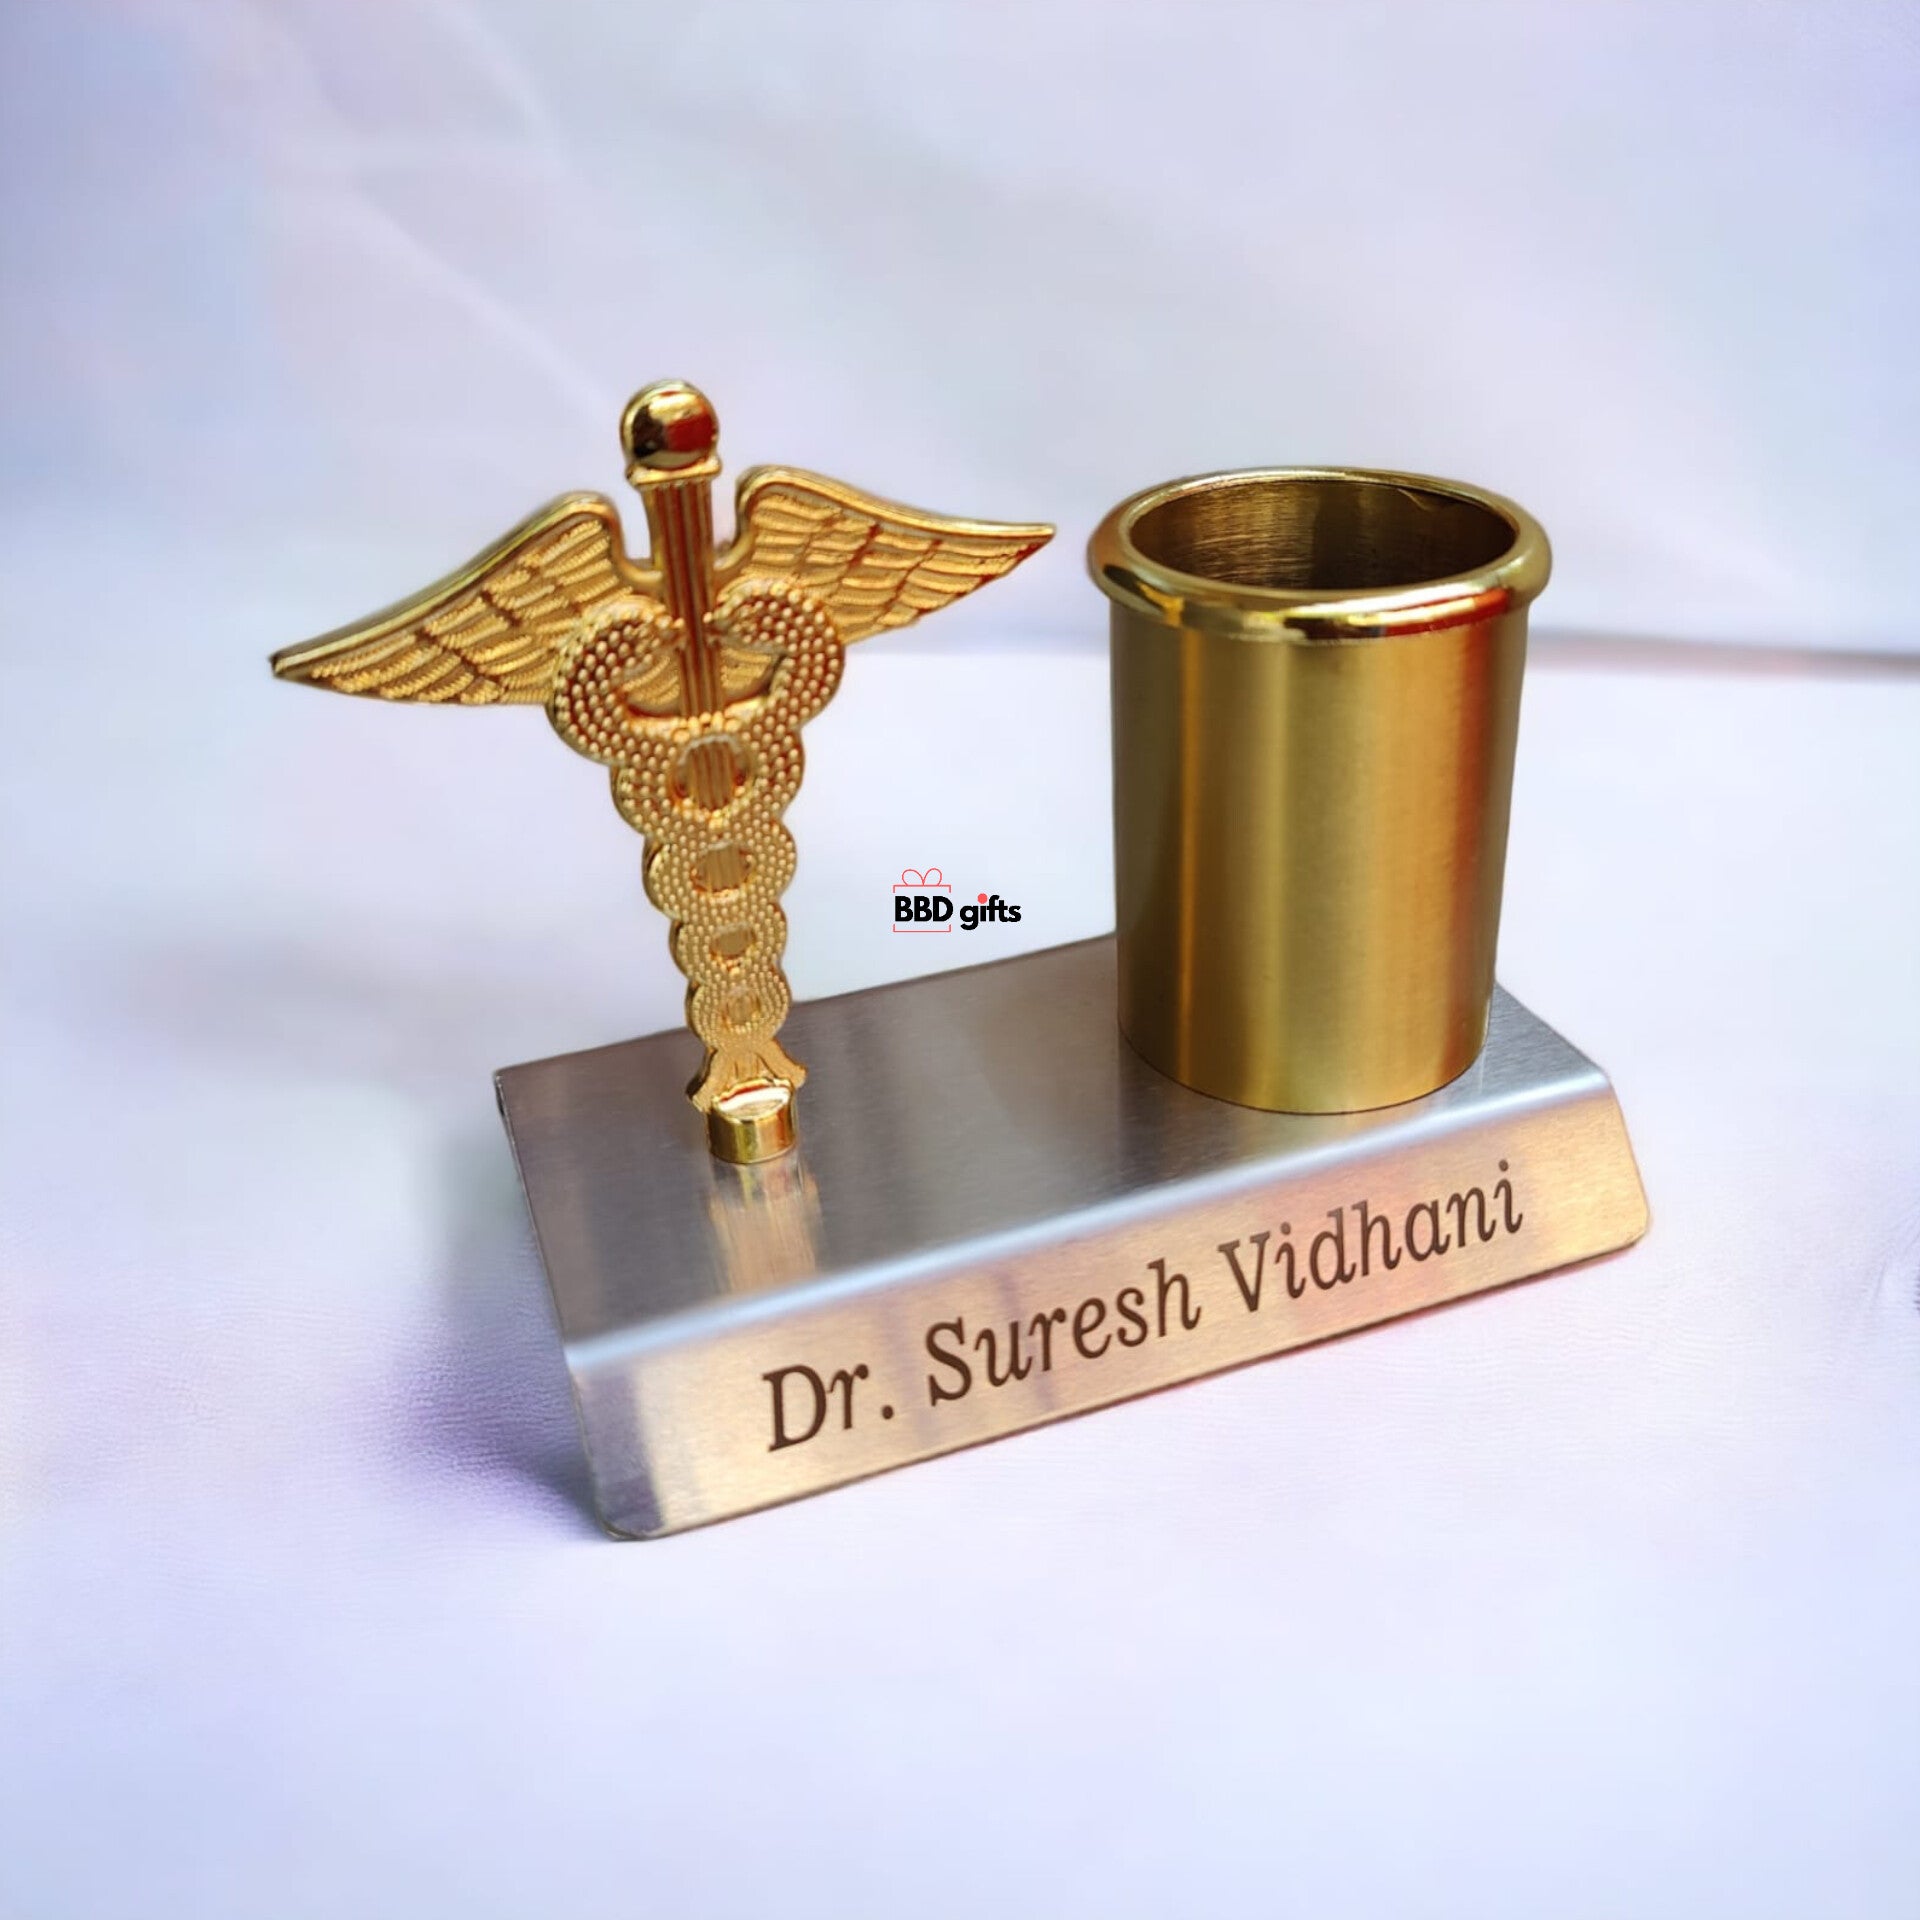 Best Gift For Doctors  Personalized Desk Name Plate For Doctors   Corporate Gifts  Personalized Gifts For Doctors  VivaGifts